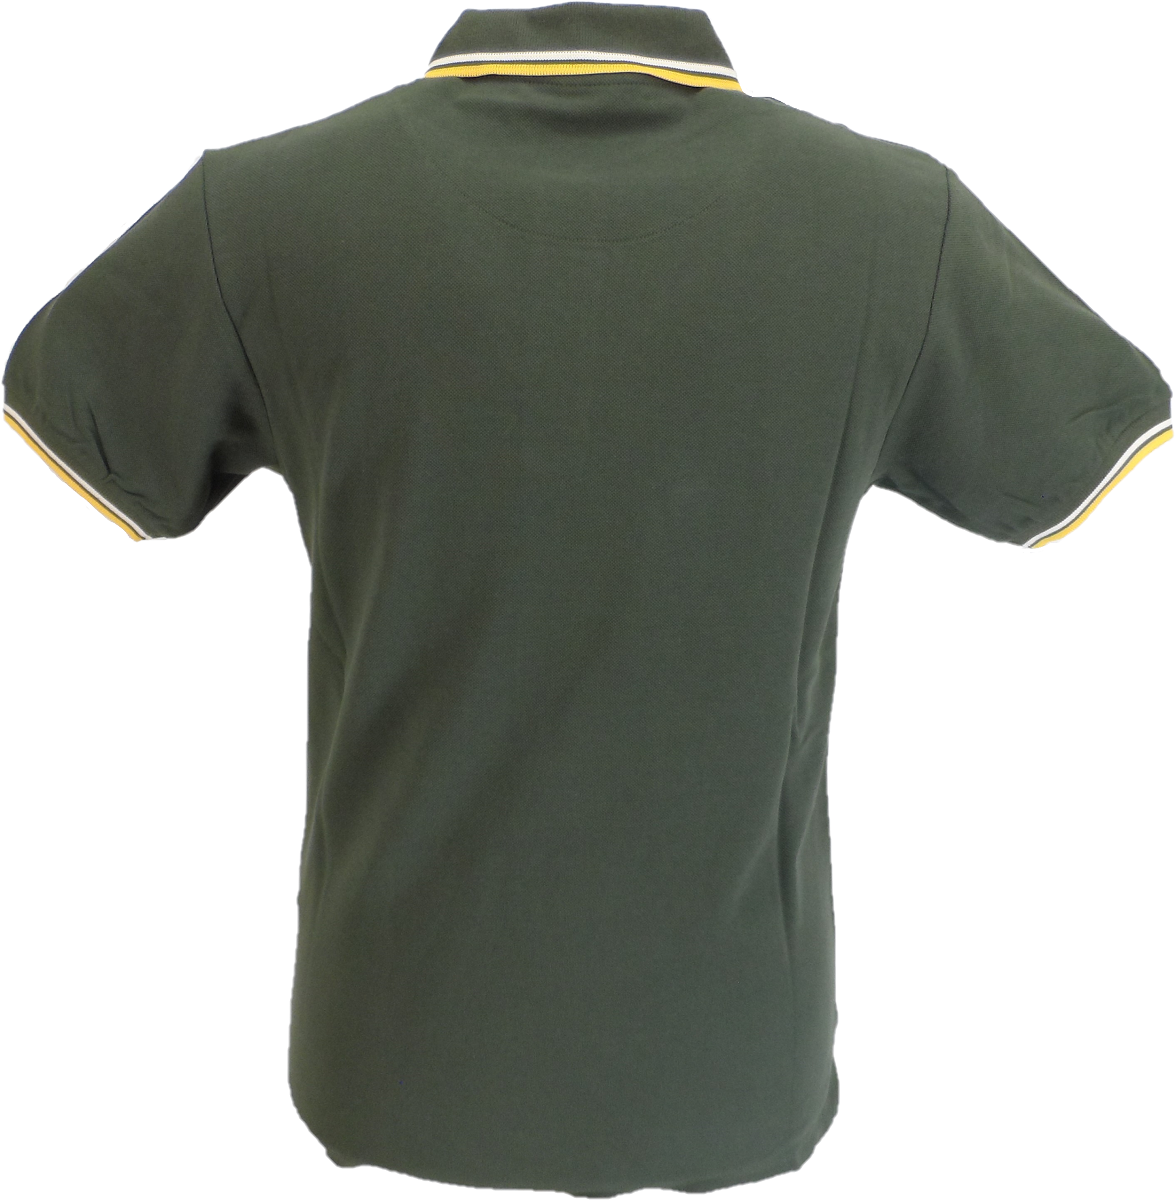 Trojan Records Mens Army Green Twin Tipped Polo Shirt